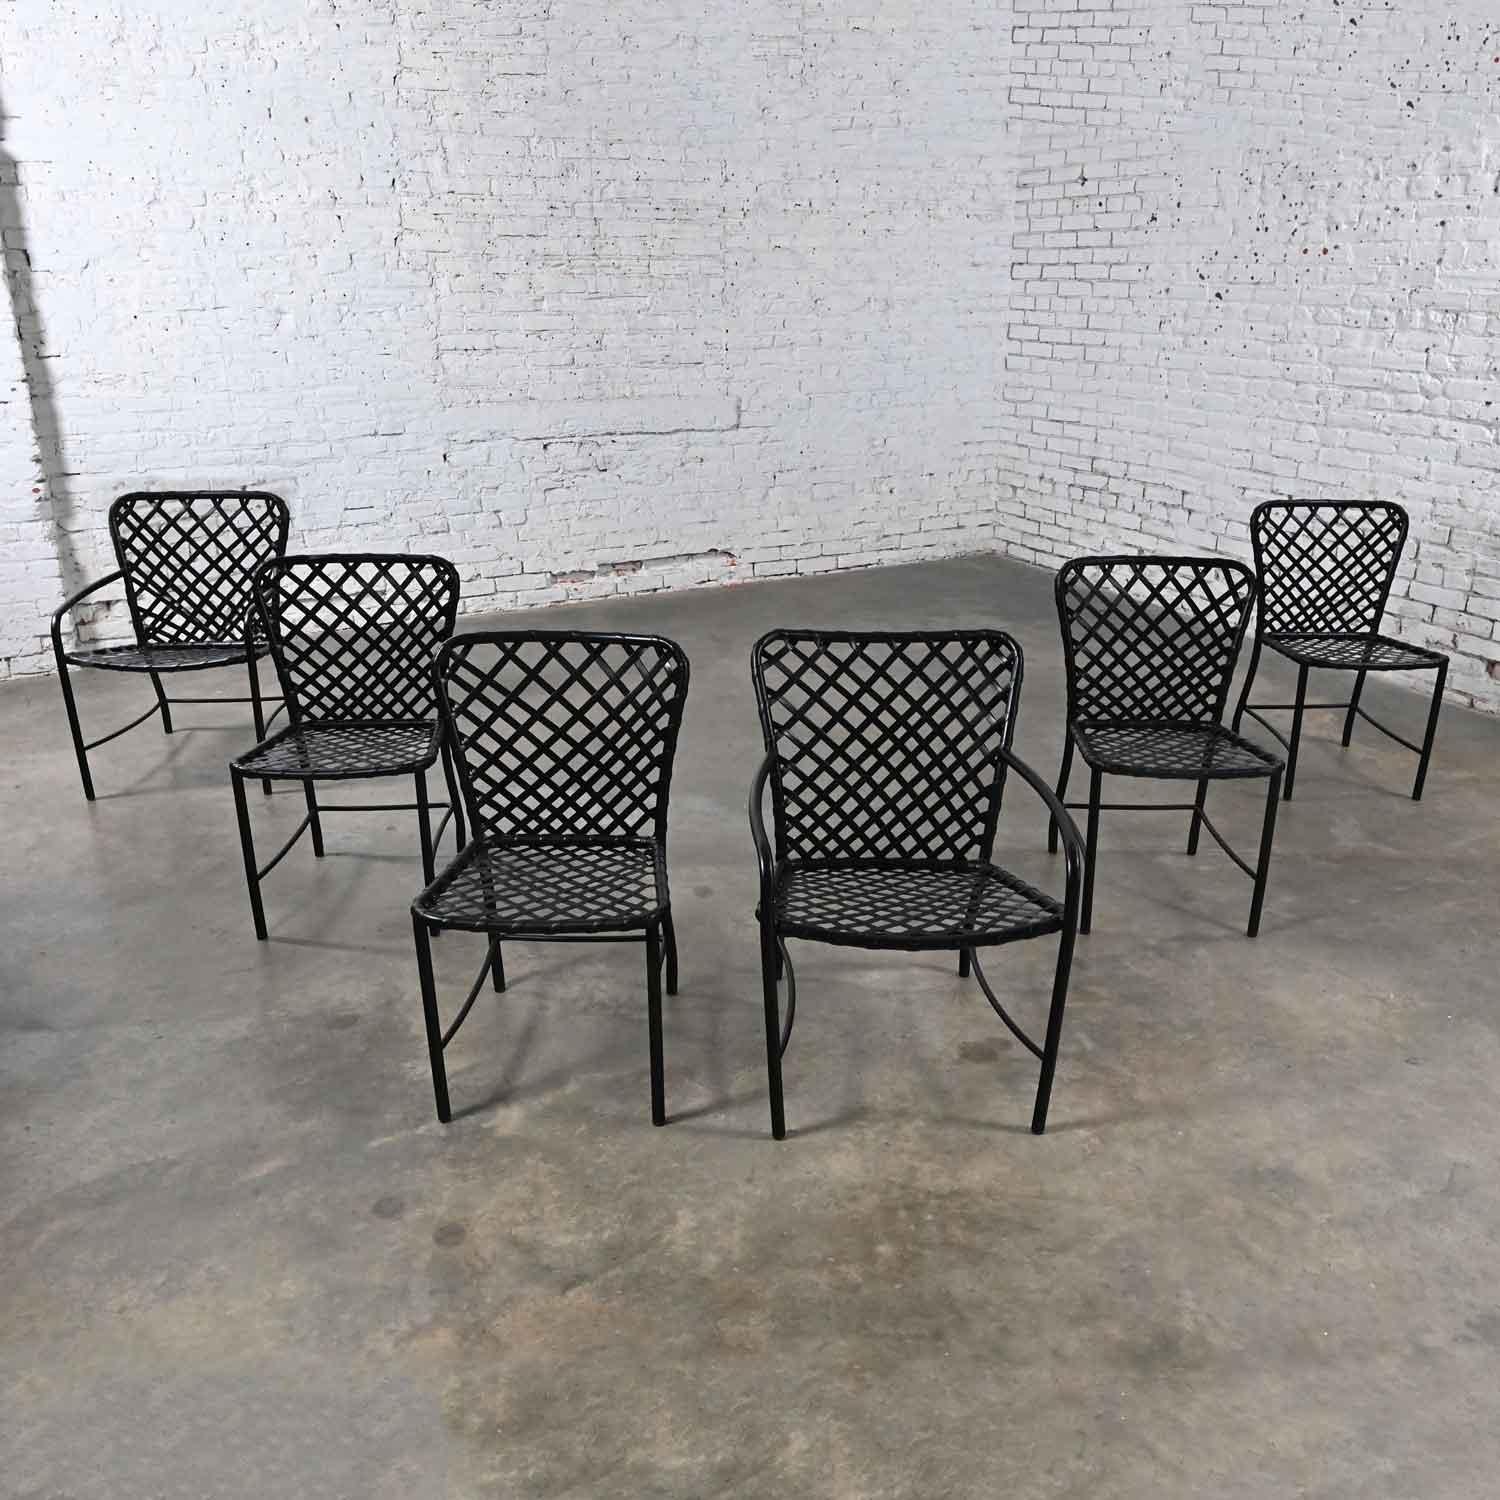 Wonderful vintage MCM (Mid Century Modern) Brown Jordan Tamiami outdoor dining chairs by Hall Bradley 4 side and 2 armchairs, set of 6. Comprised of aluminum frames with woven vinyl slings. They have been given a new spray coated black vinyl dye on